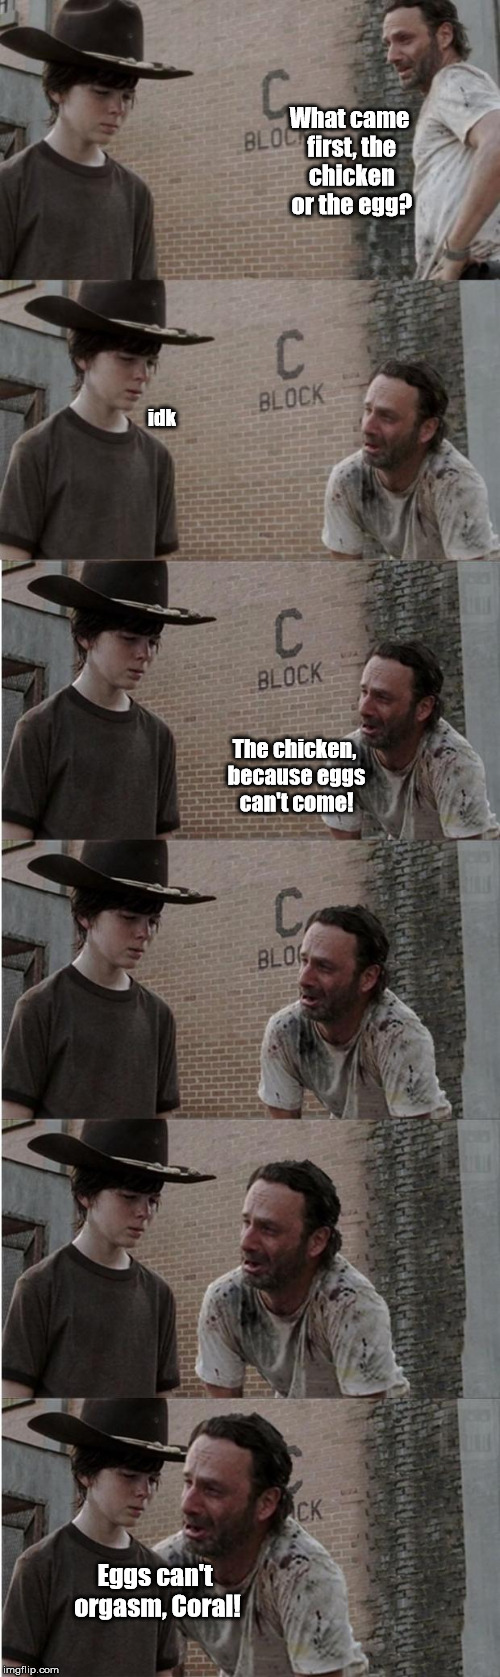 Rick and Carl Longer Meme | What came first, the chicken or the egg? idk The chicken, because eggs can't come! Eggs can't orgasm, Coral! | image tagged in memes,rick and carl longer | made w/ Imgflip meme maker